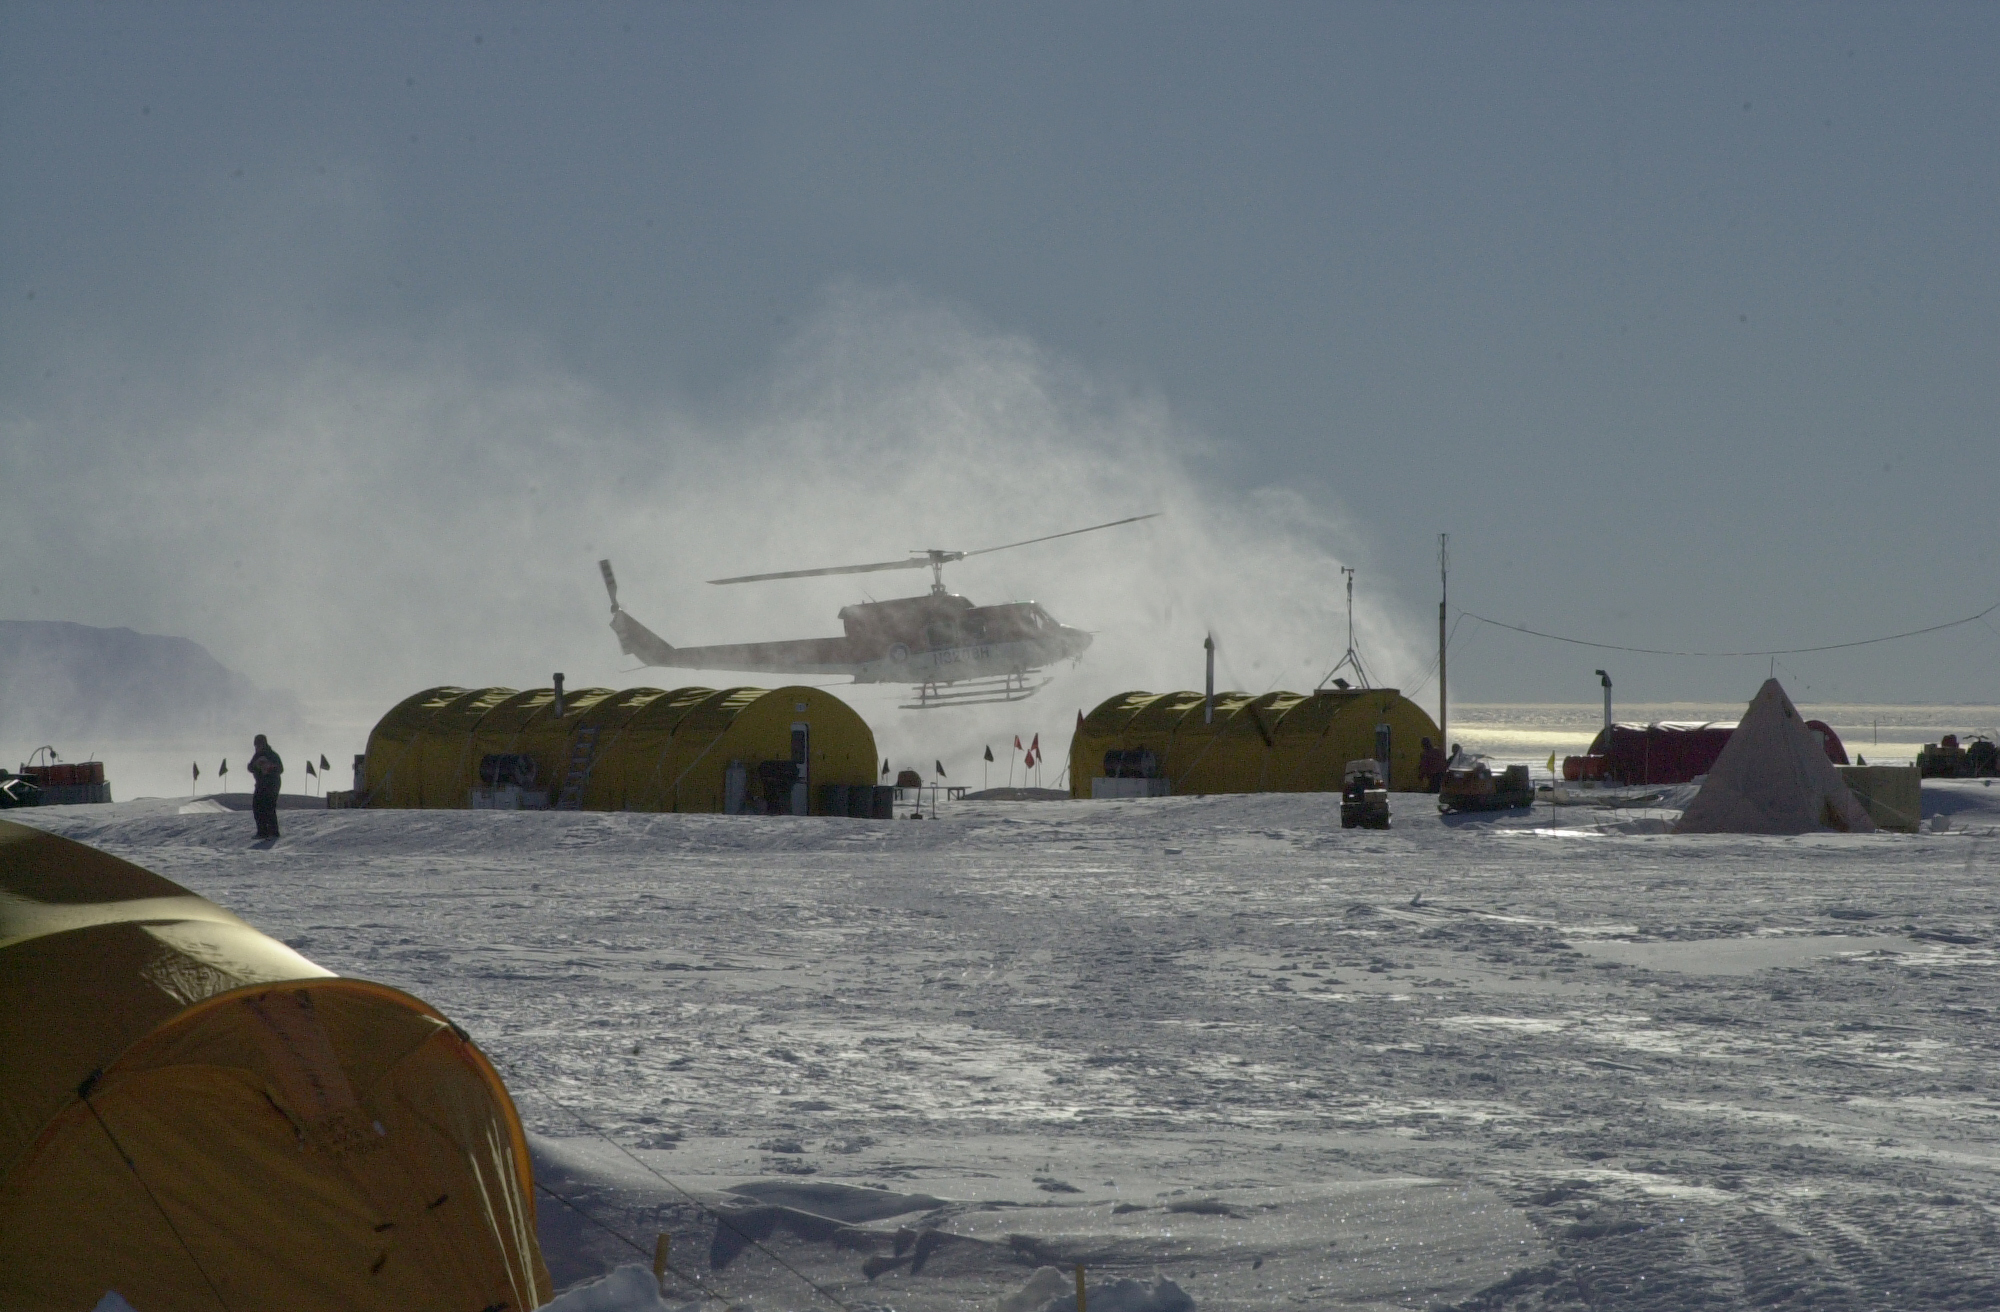 A helicopter landing on a snowy field near temporary buildings.